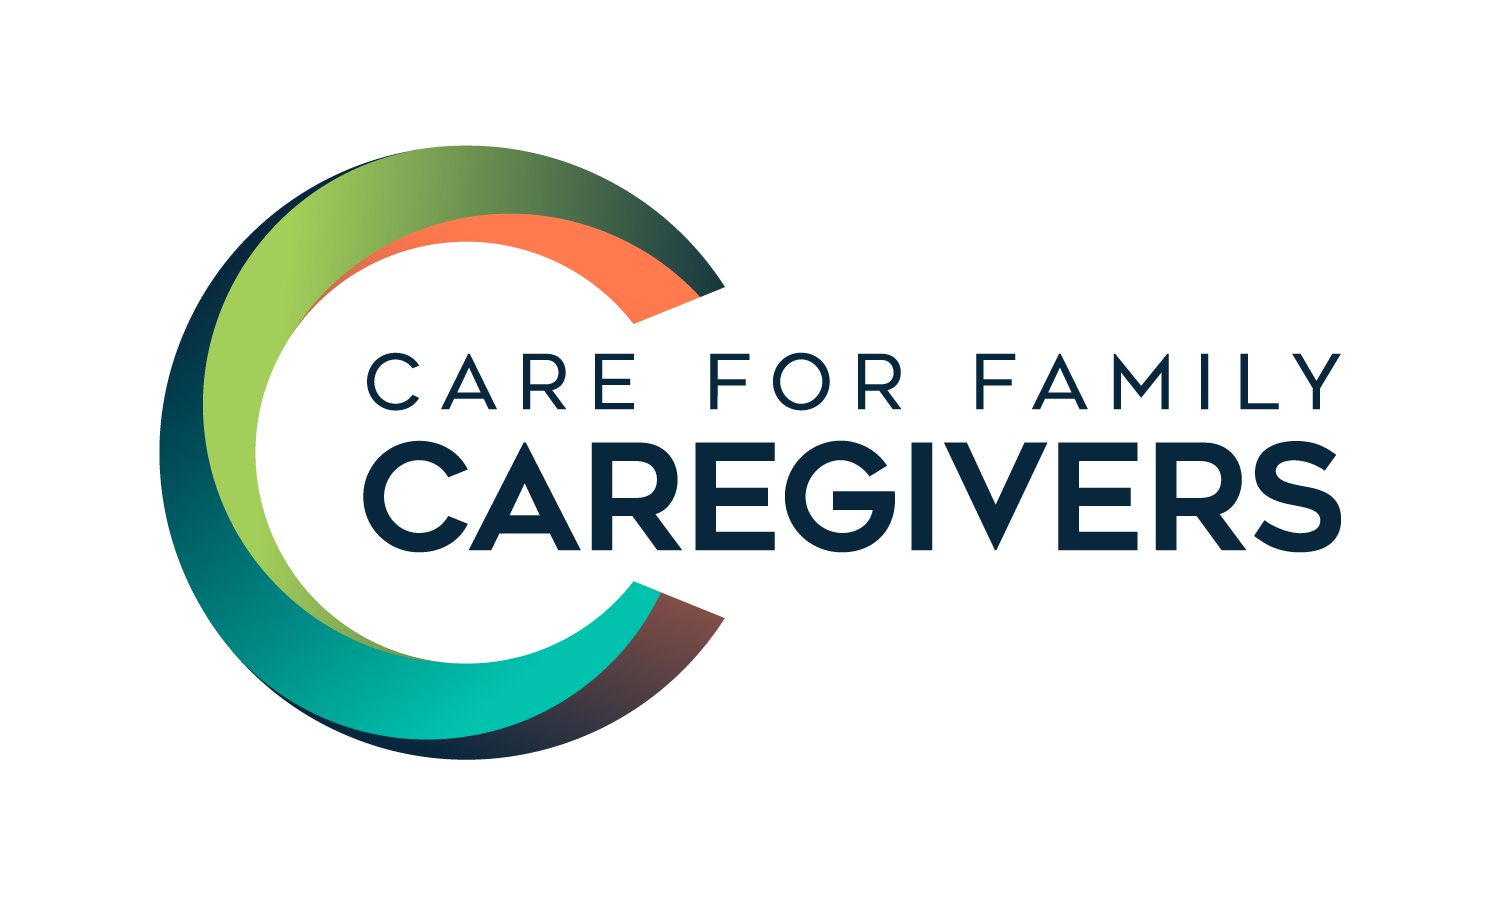 Care for Family Caregivers